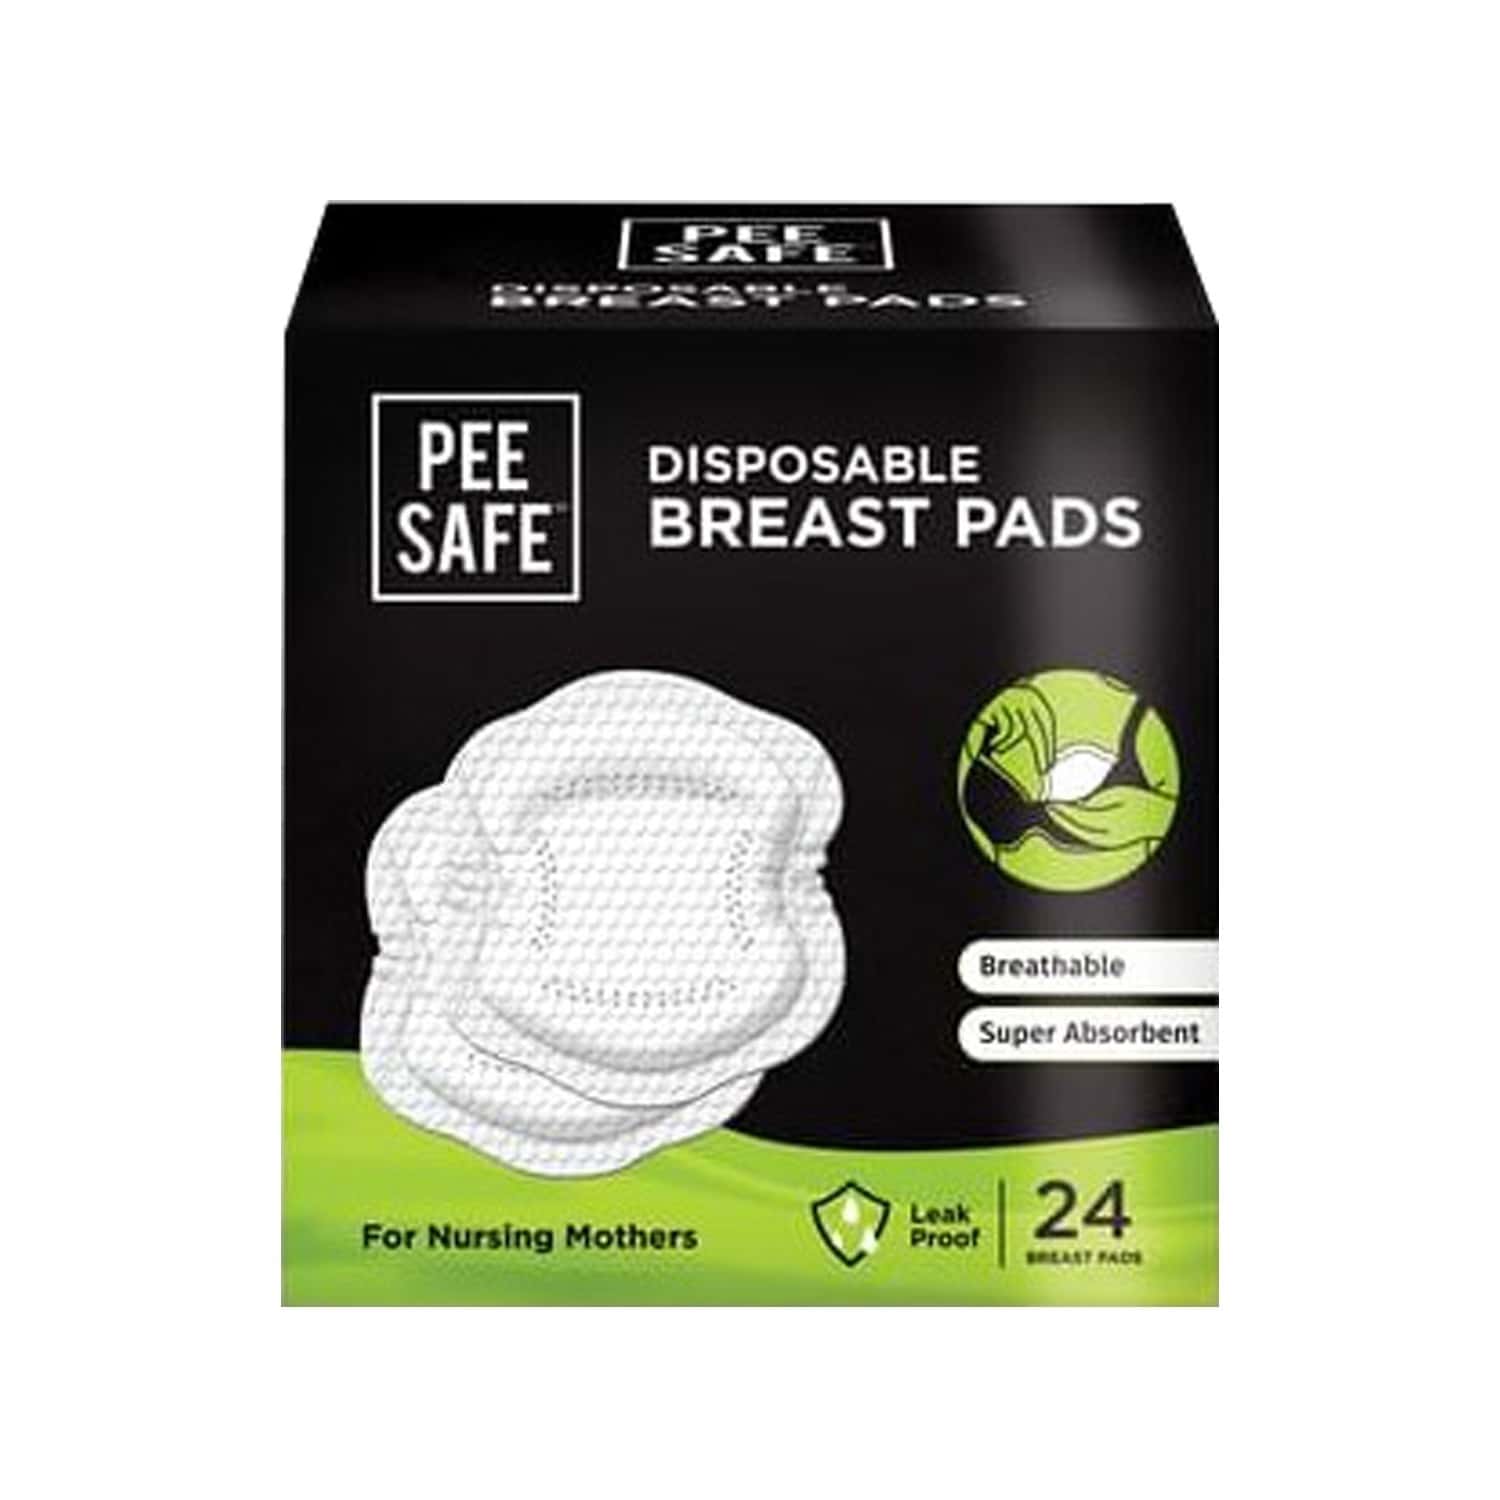 Pee Safe Disposable Breast Pads Packet Of 24 - Medanand